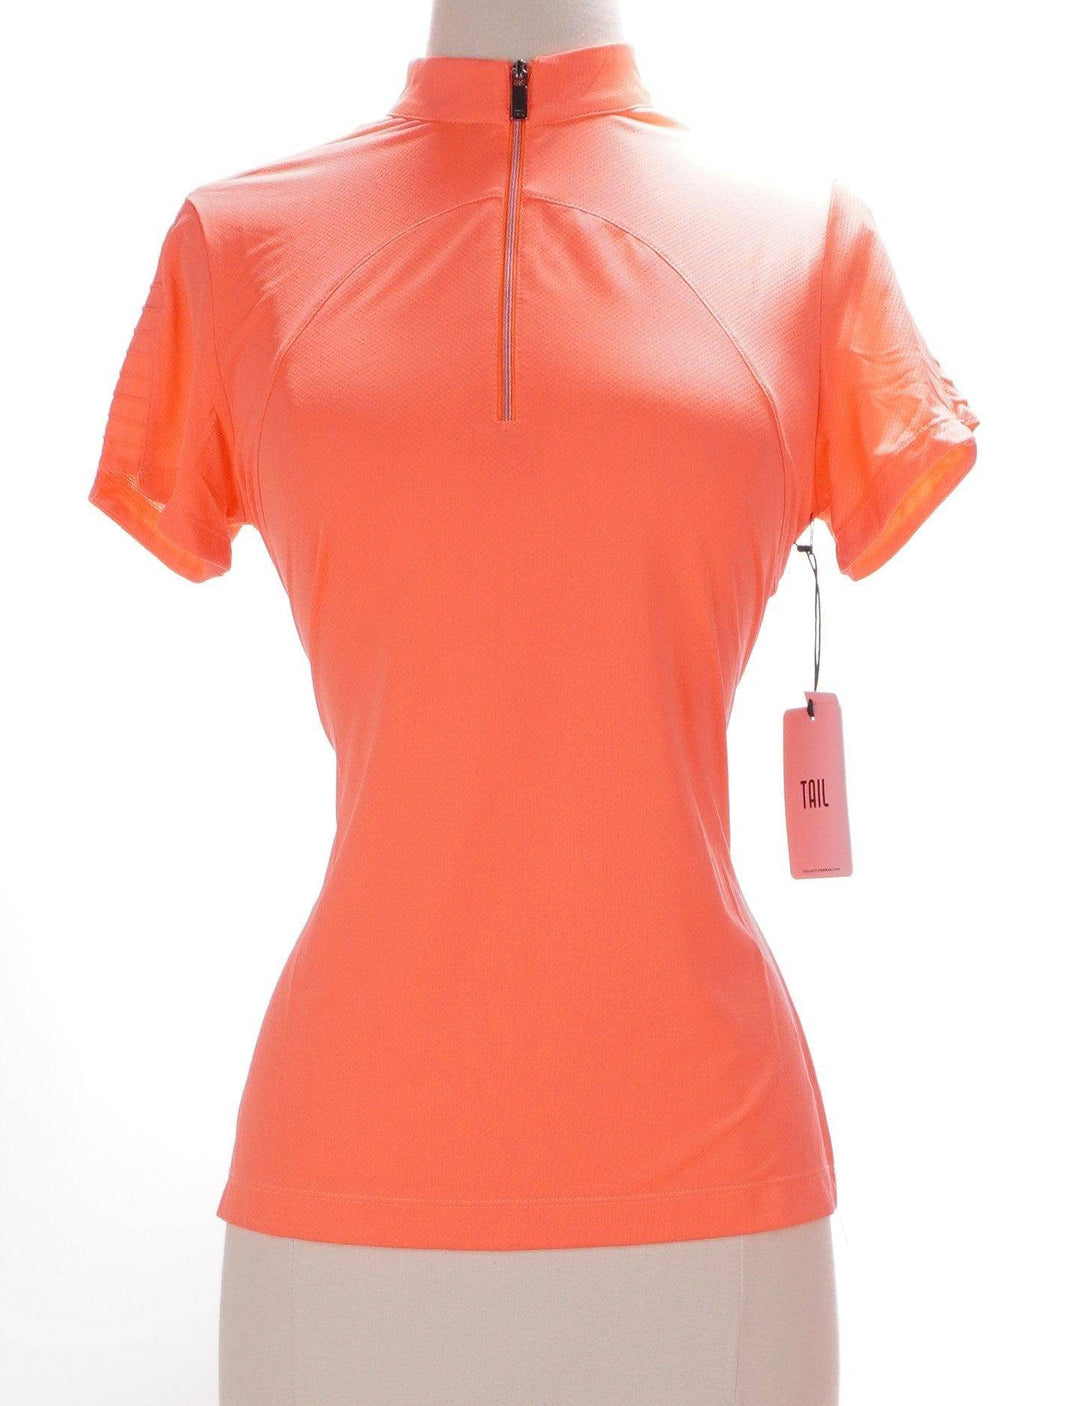 Tail Orange / Small Tail Short Sleeve Top - Zest - Size Small